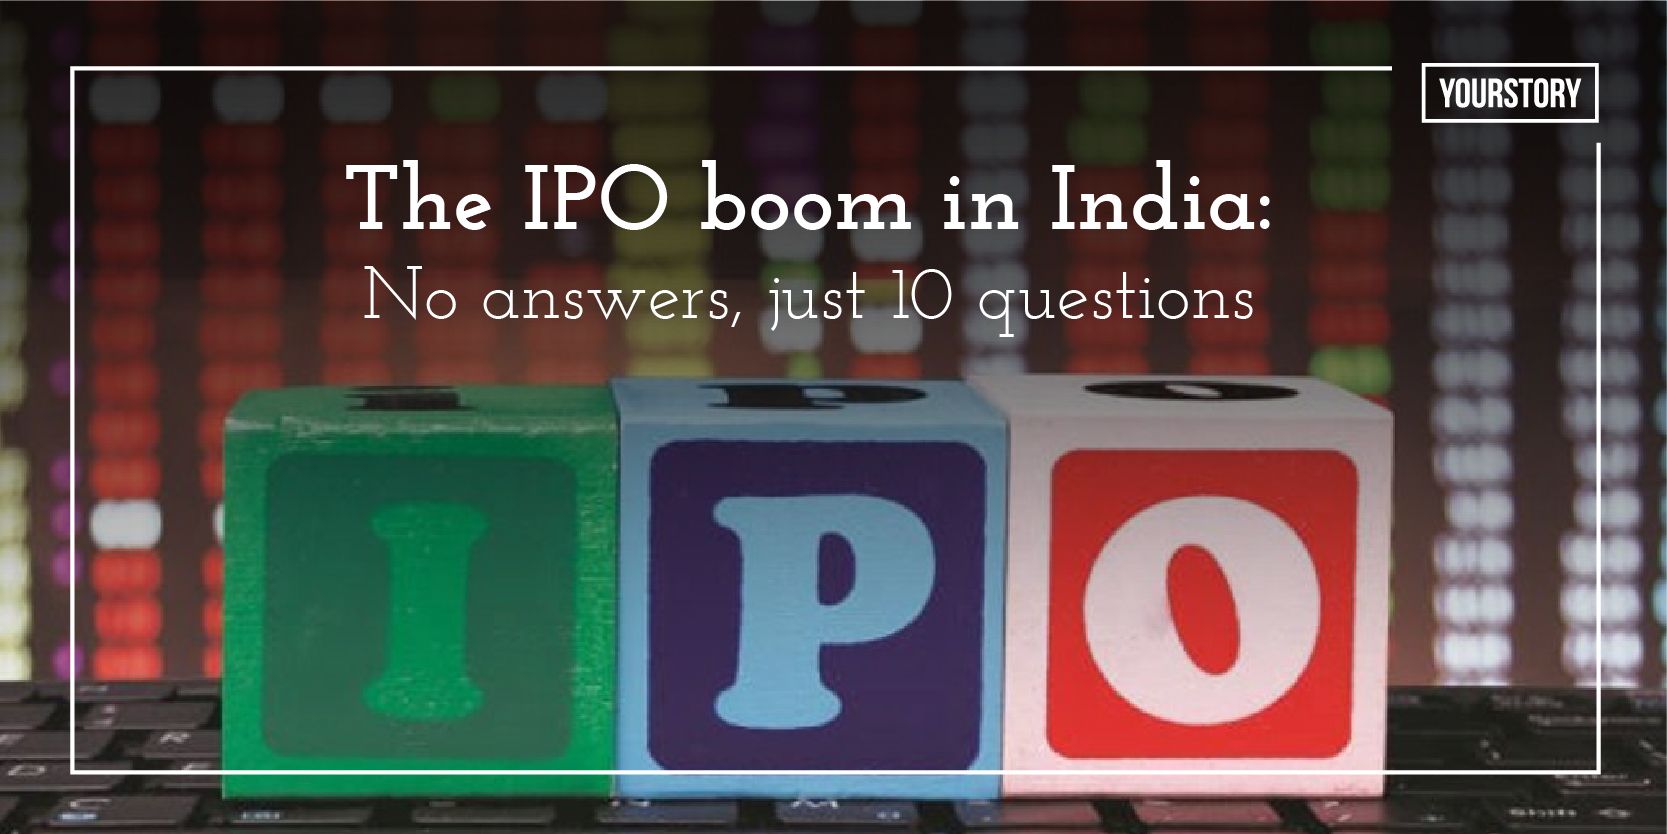 The IPO boom in India: No answers, just 10 questions